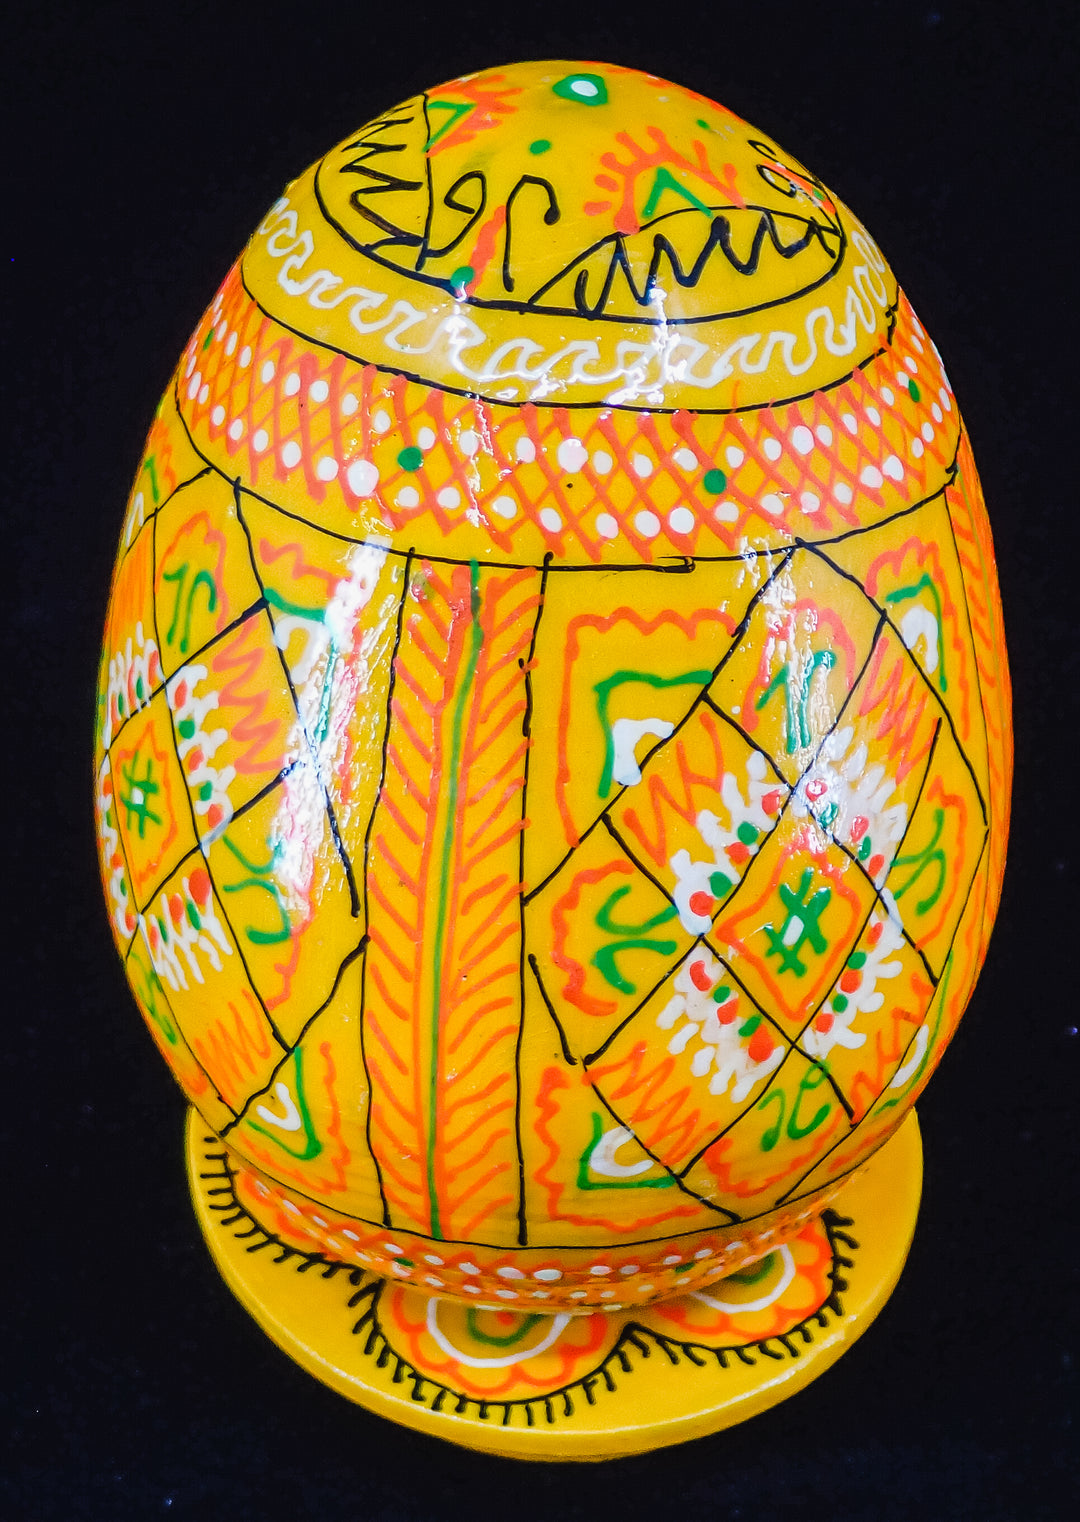 ONE LARGE UKRANIAN PYSANKY EASTER EGG ON A STAND MADE IN UKRAINE!